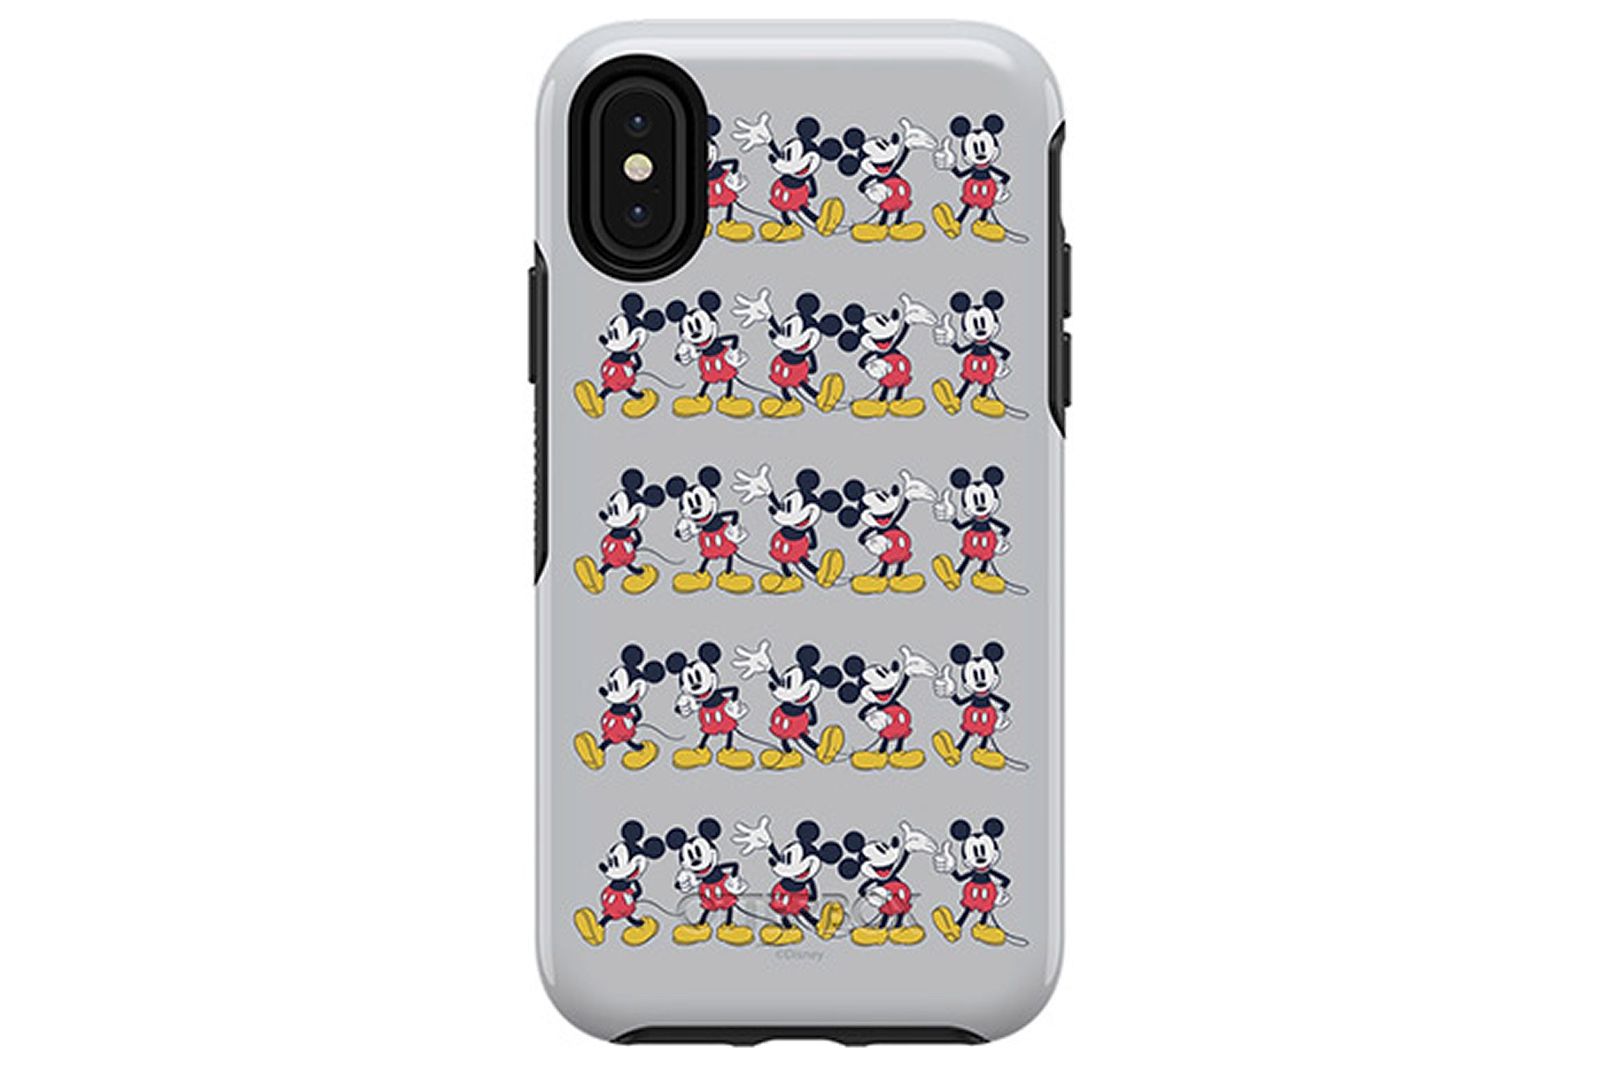 Best Disney Otterbox cases Protection fit for a Princess or a mouse image 10